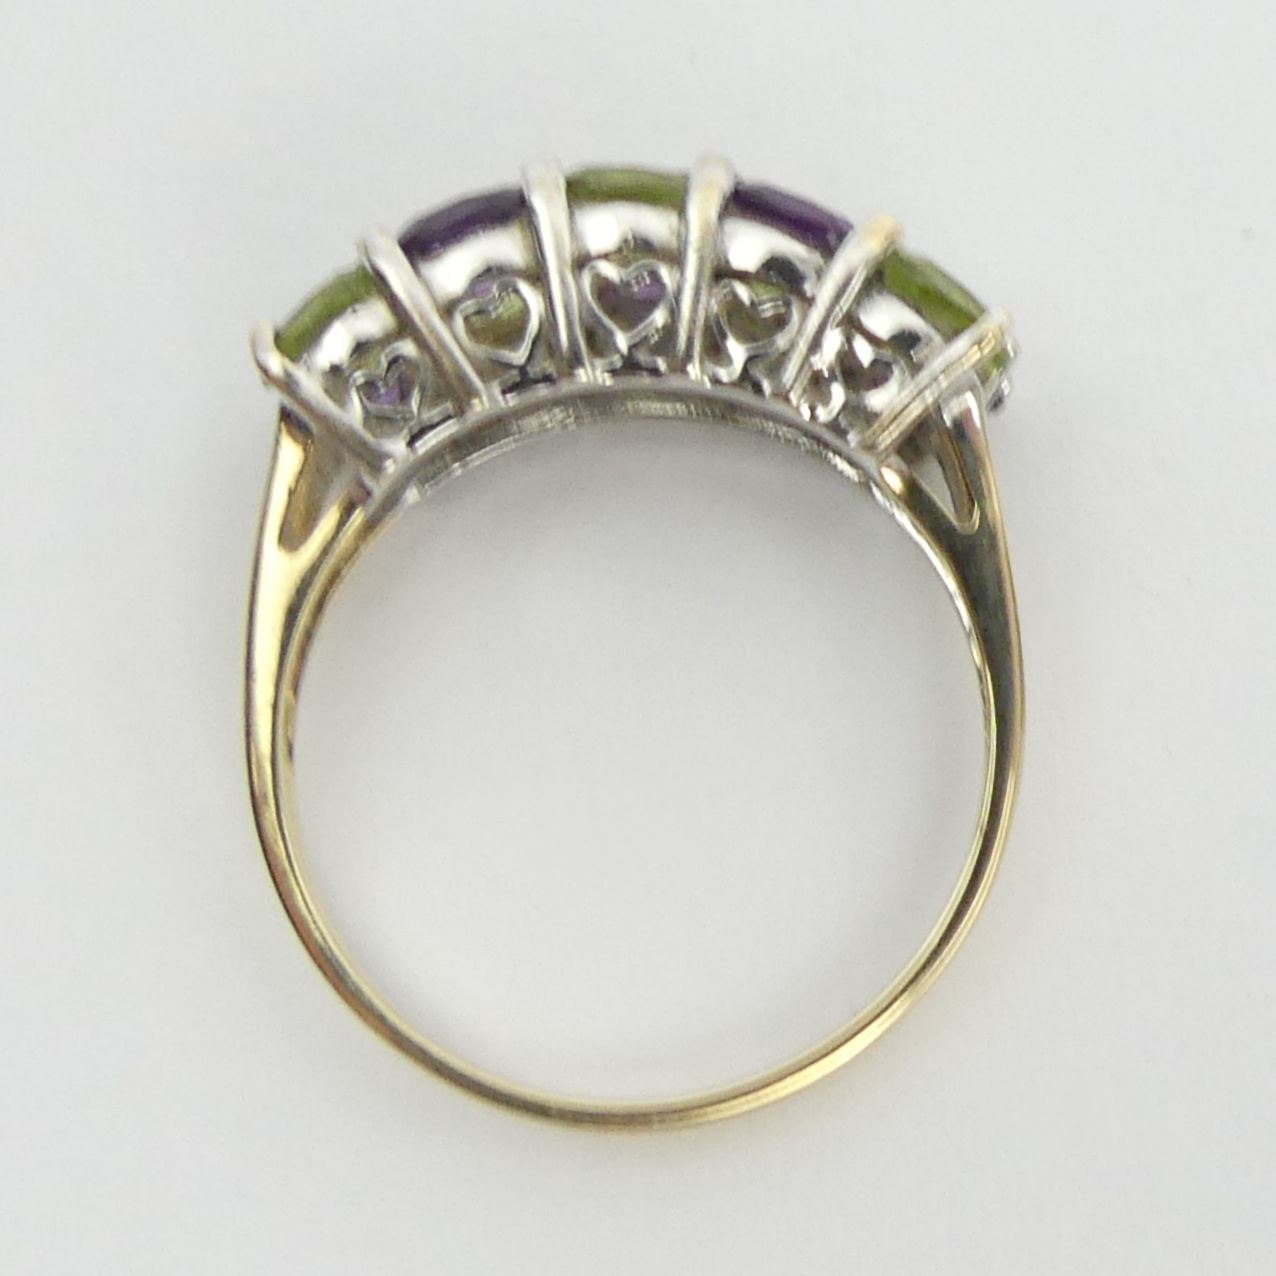 9ct gold peridot, amethyst and diamond ring, 2.4 grams, 6.6mm, size M 1/2. UK Postage £12. - Image 5 of 6